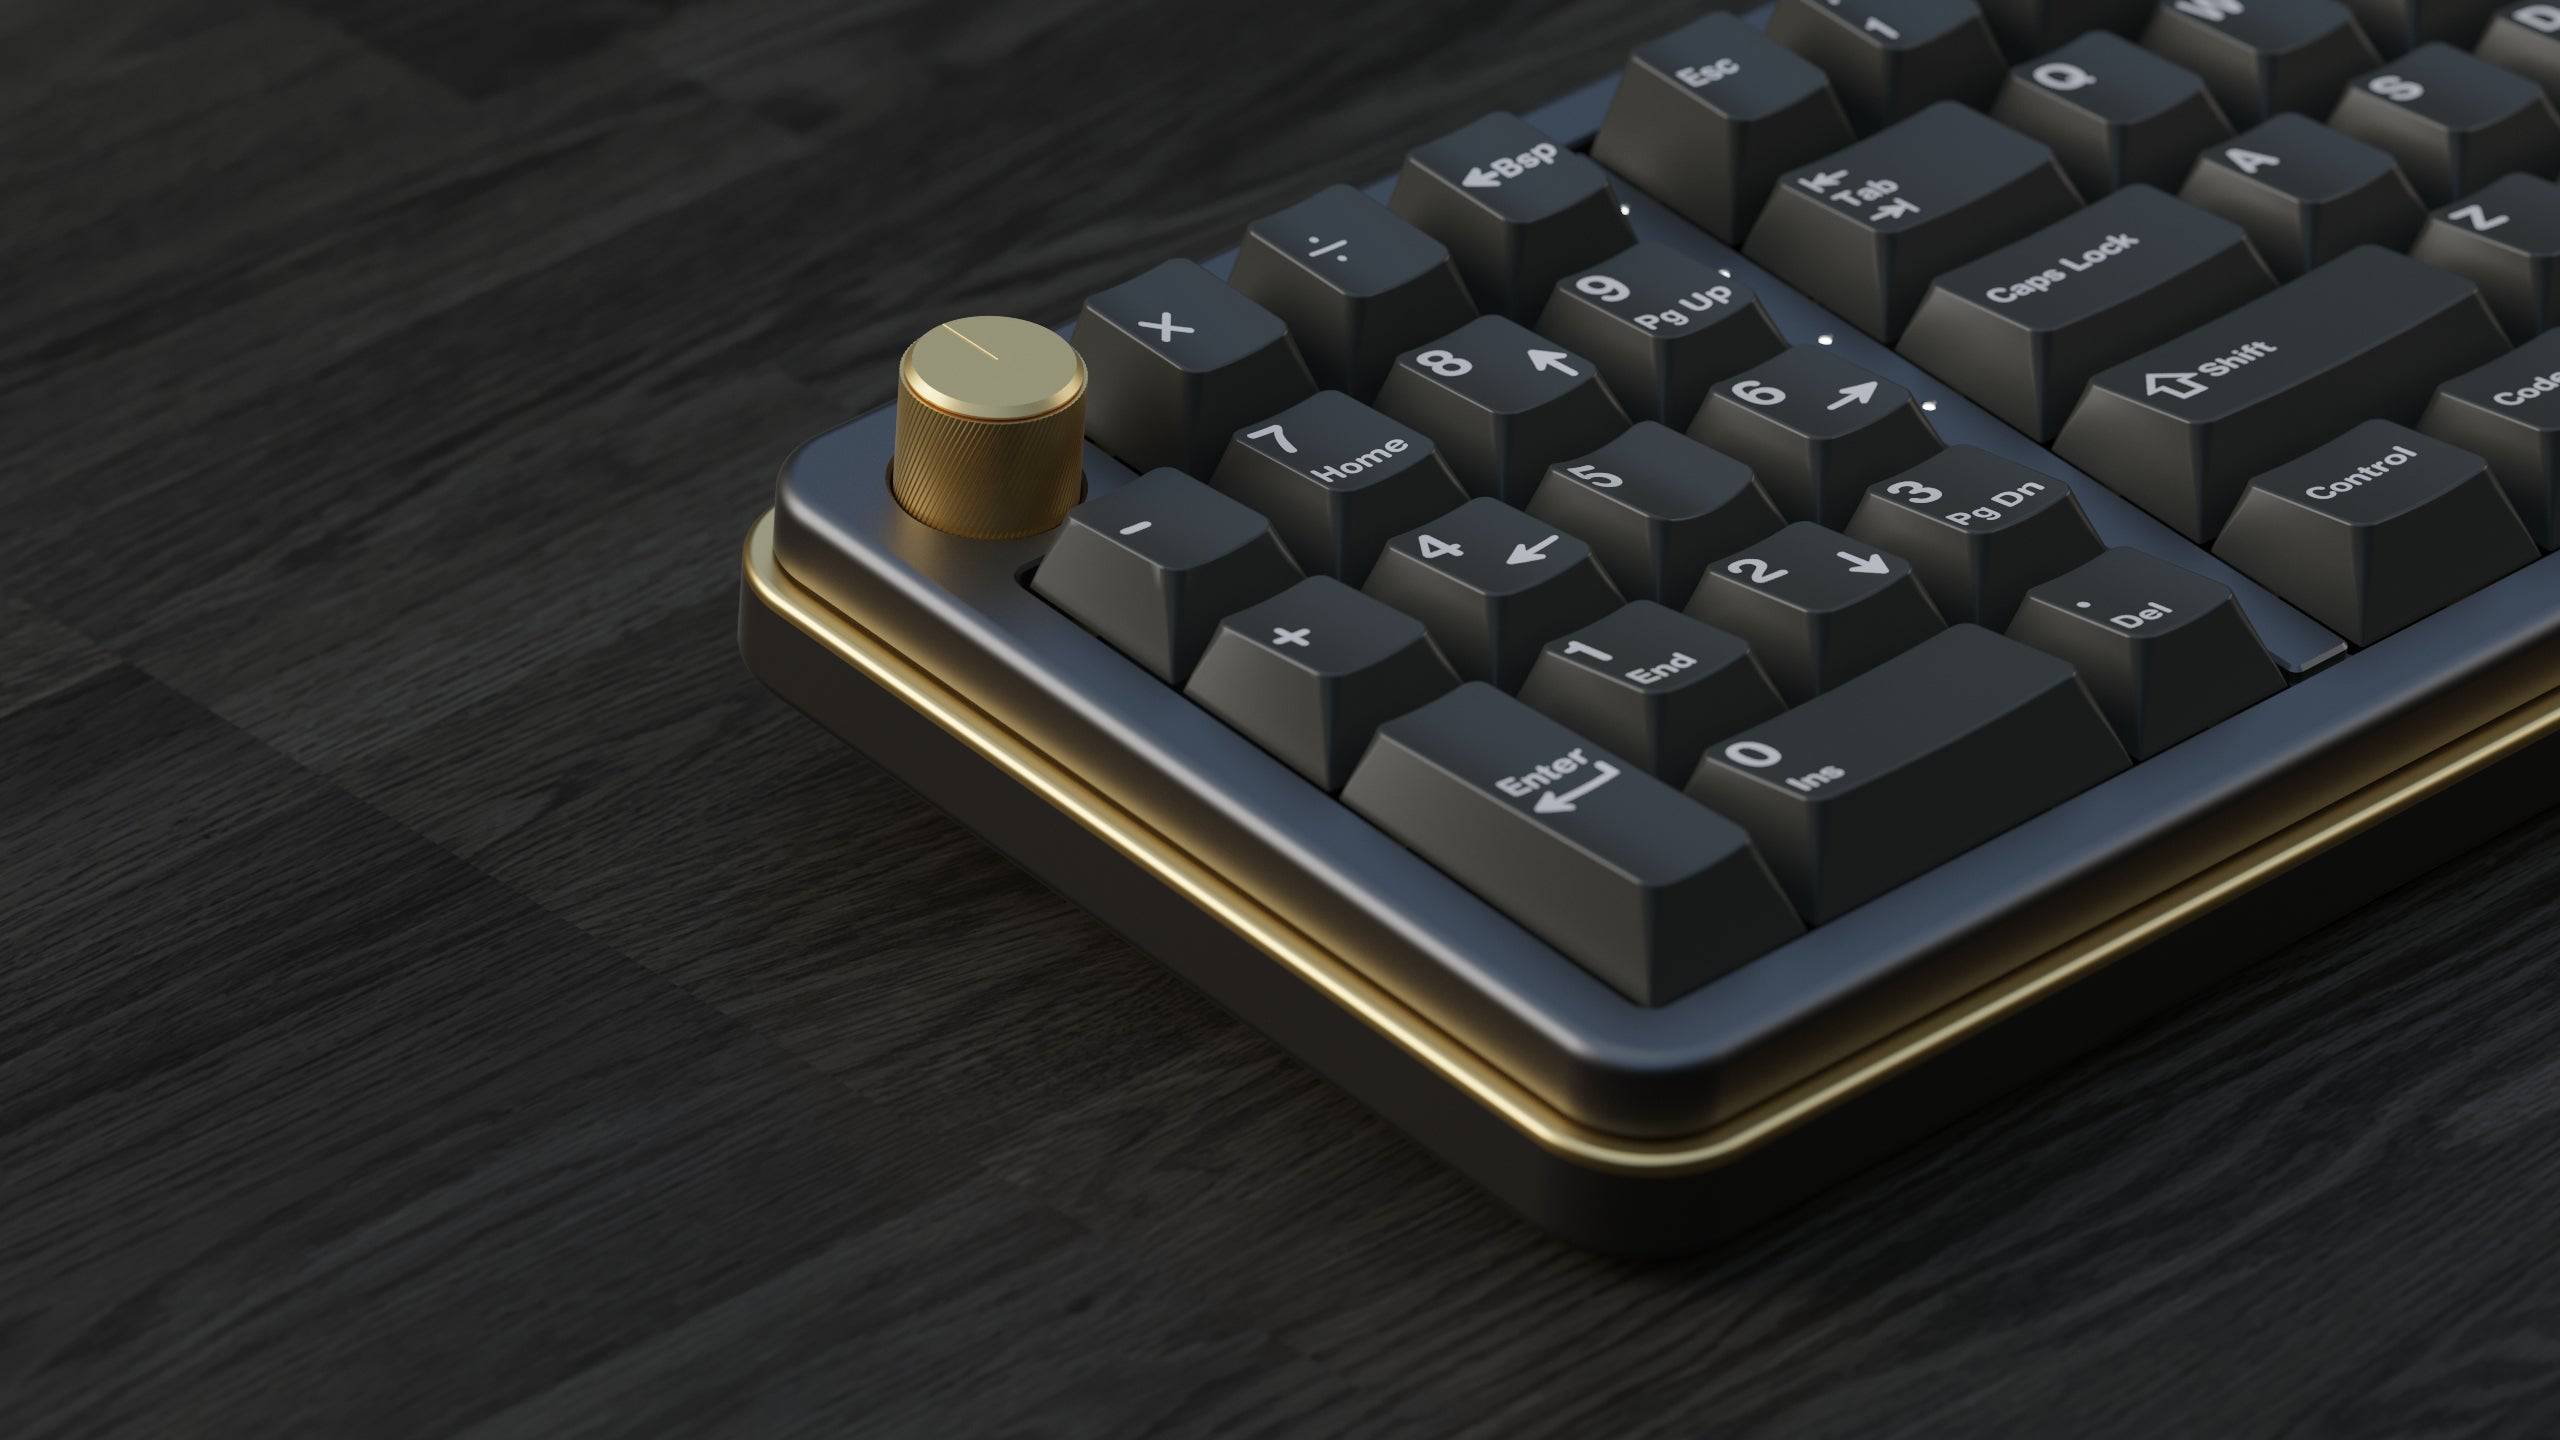 Viendi 8L numpad shown in the Shadow color variant proxied by KeebsForAll